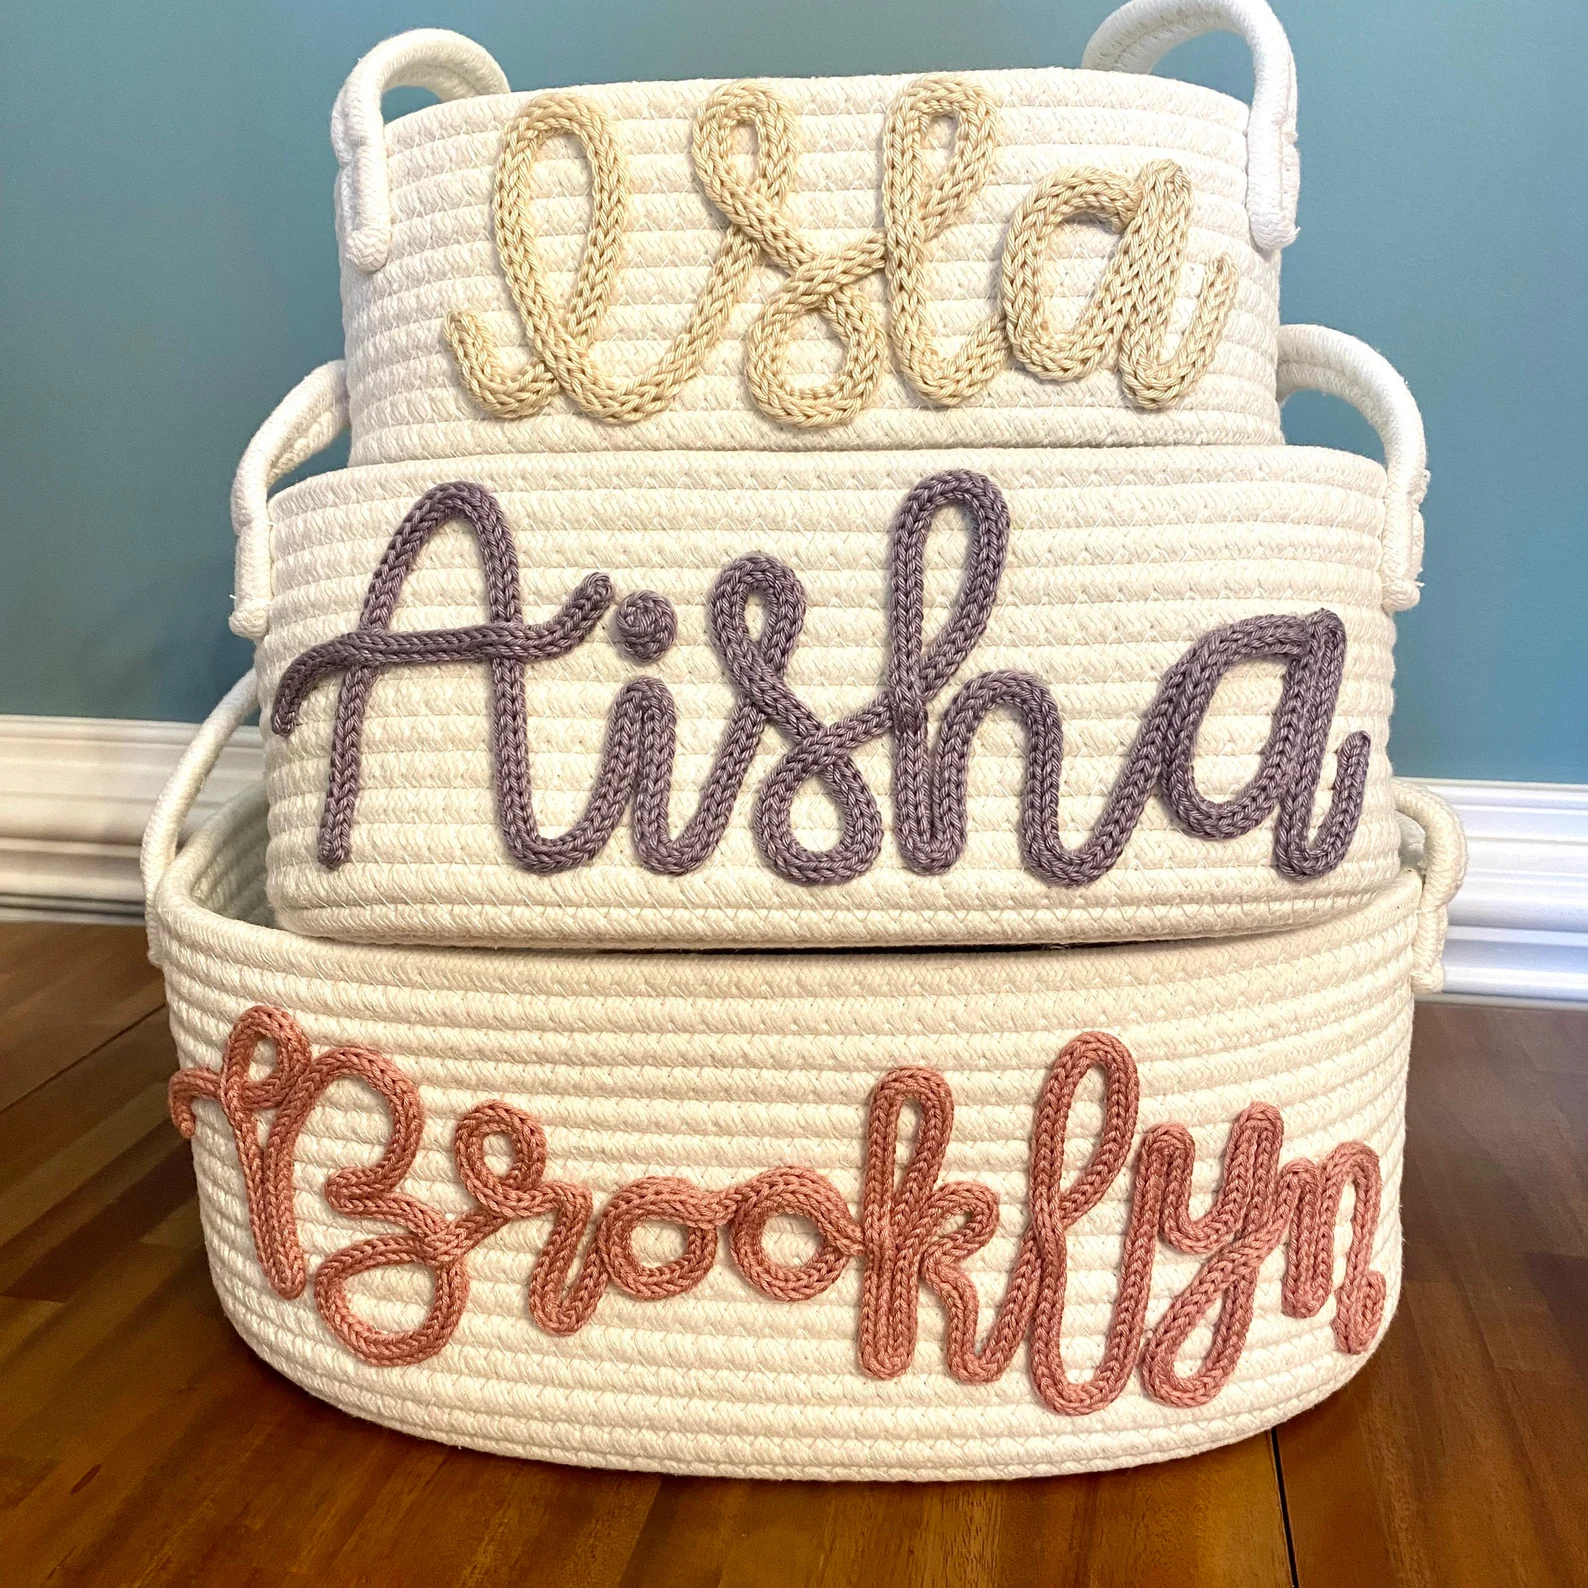 Personalized woven baskets 